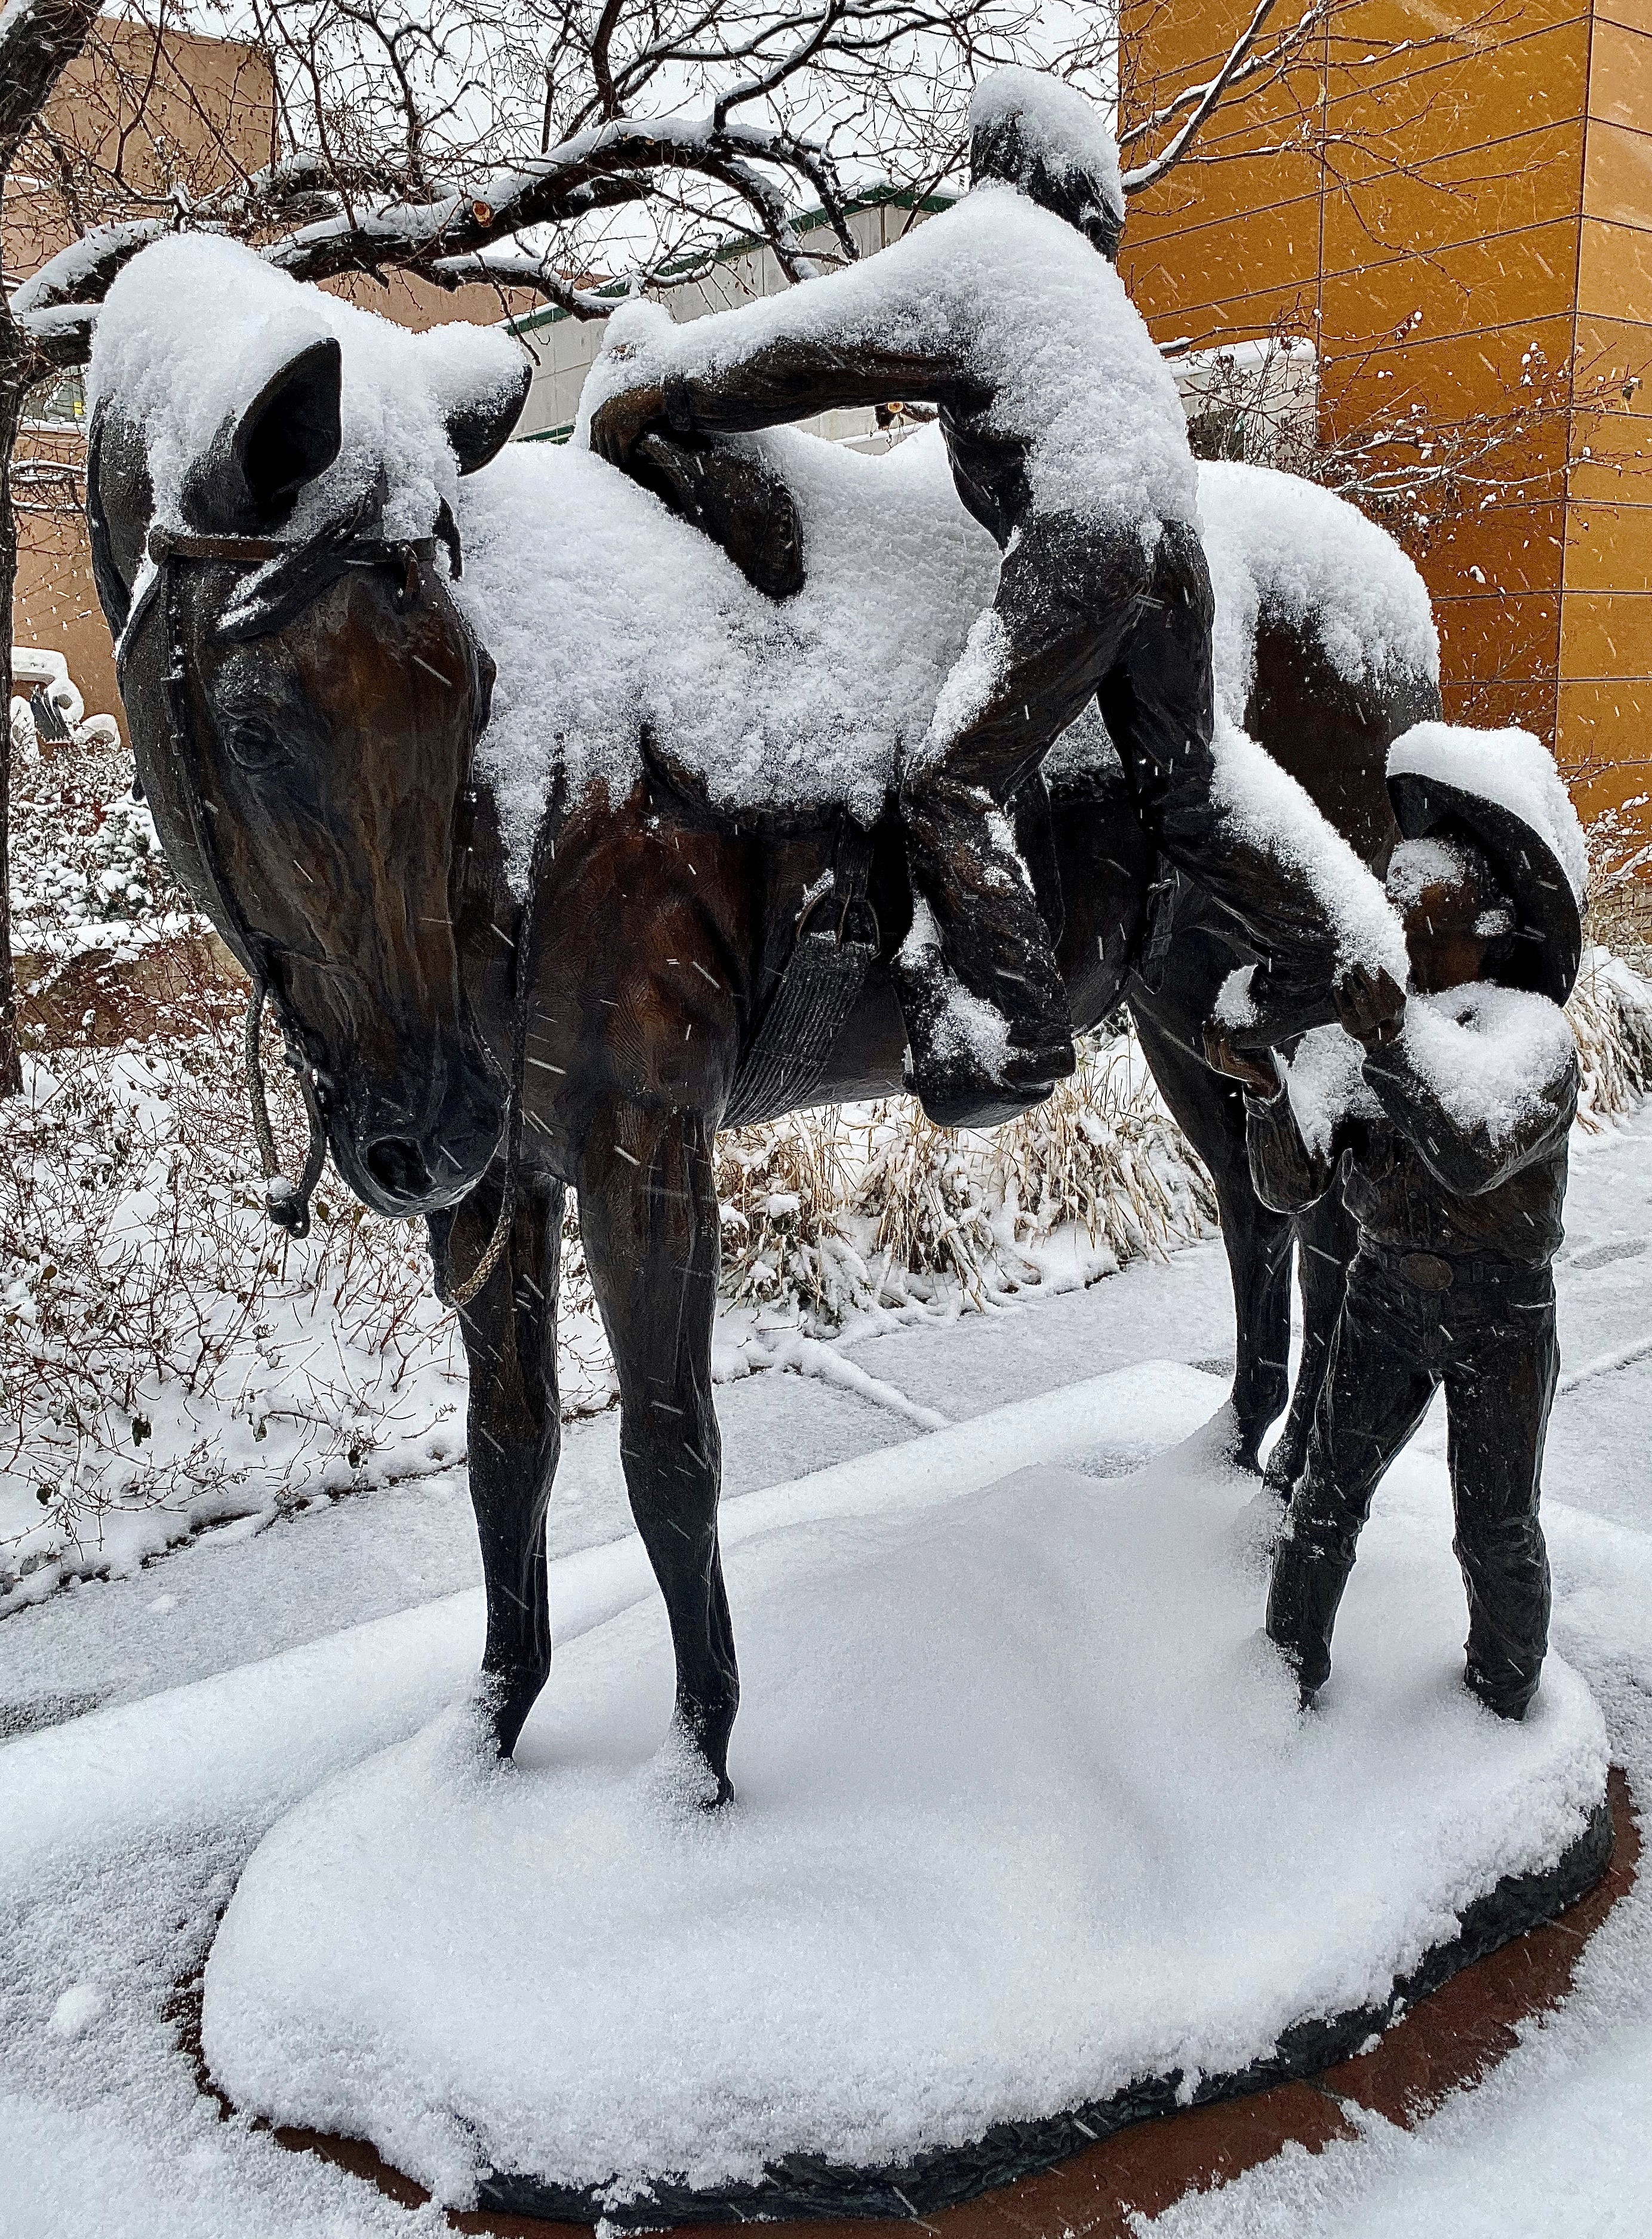 Eddie Castro took this photo in Golden on Nov. 11, 2019, on Monday morning in the snow in Denver.